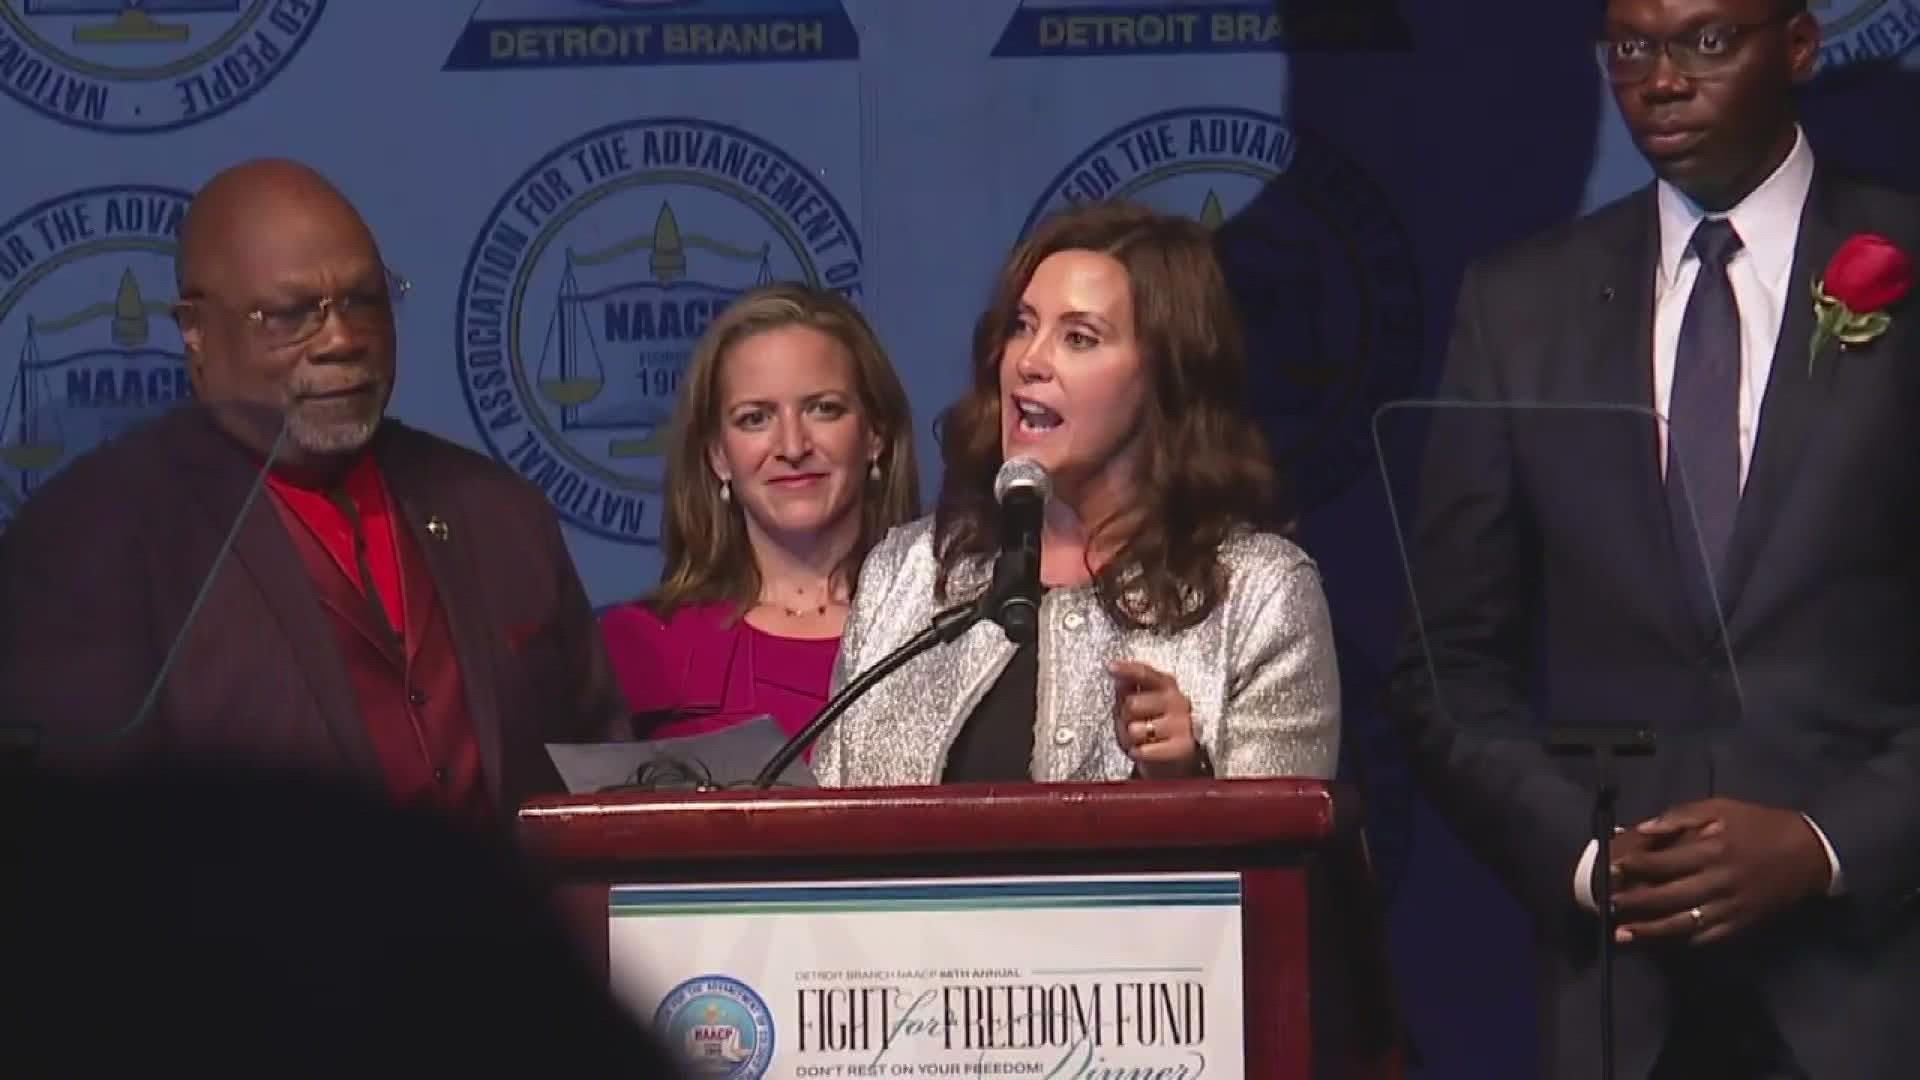 The Michigan Republican Party accused Whitmer of “grandstanding and pandering" rather than strengthening election security.